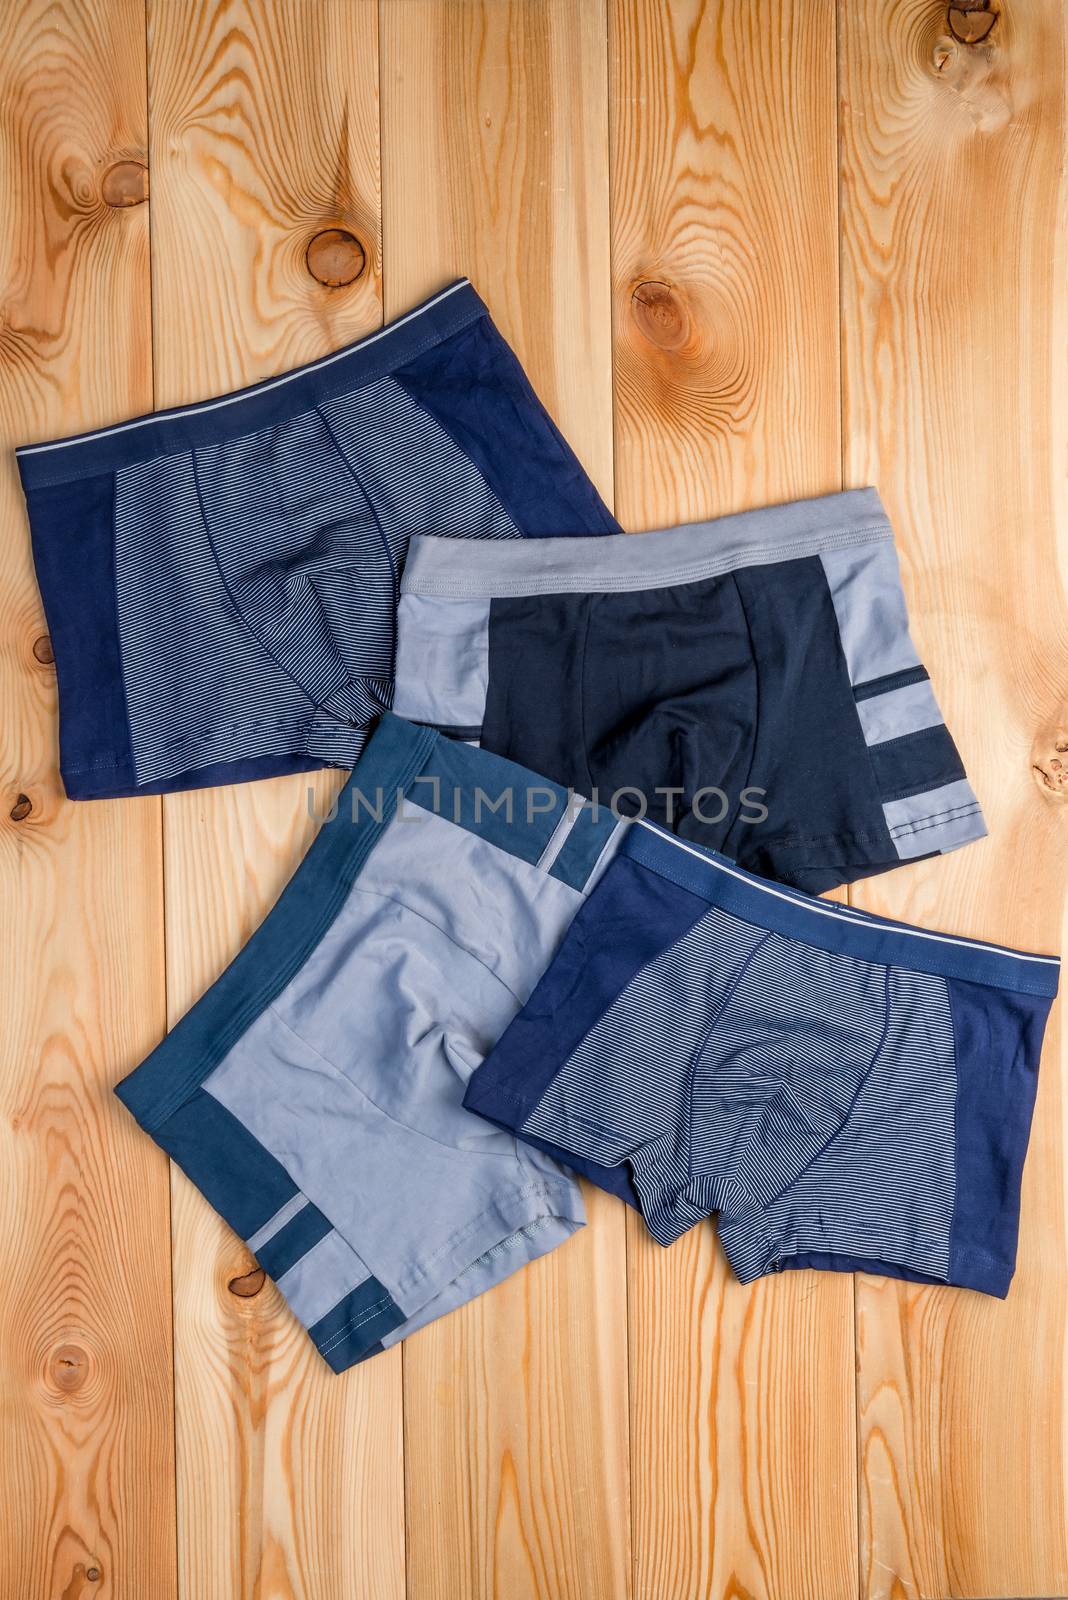 set of cotton panties for boy clothes on wooden boards top view